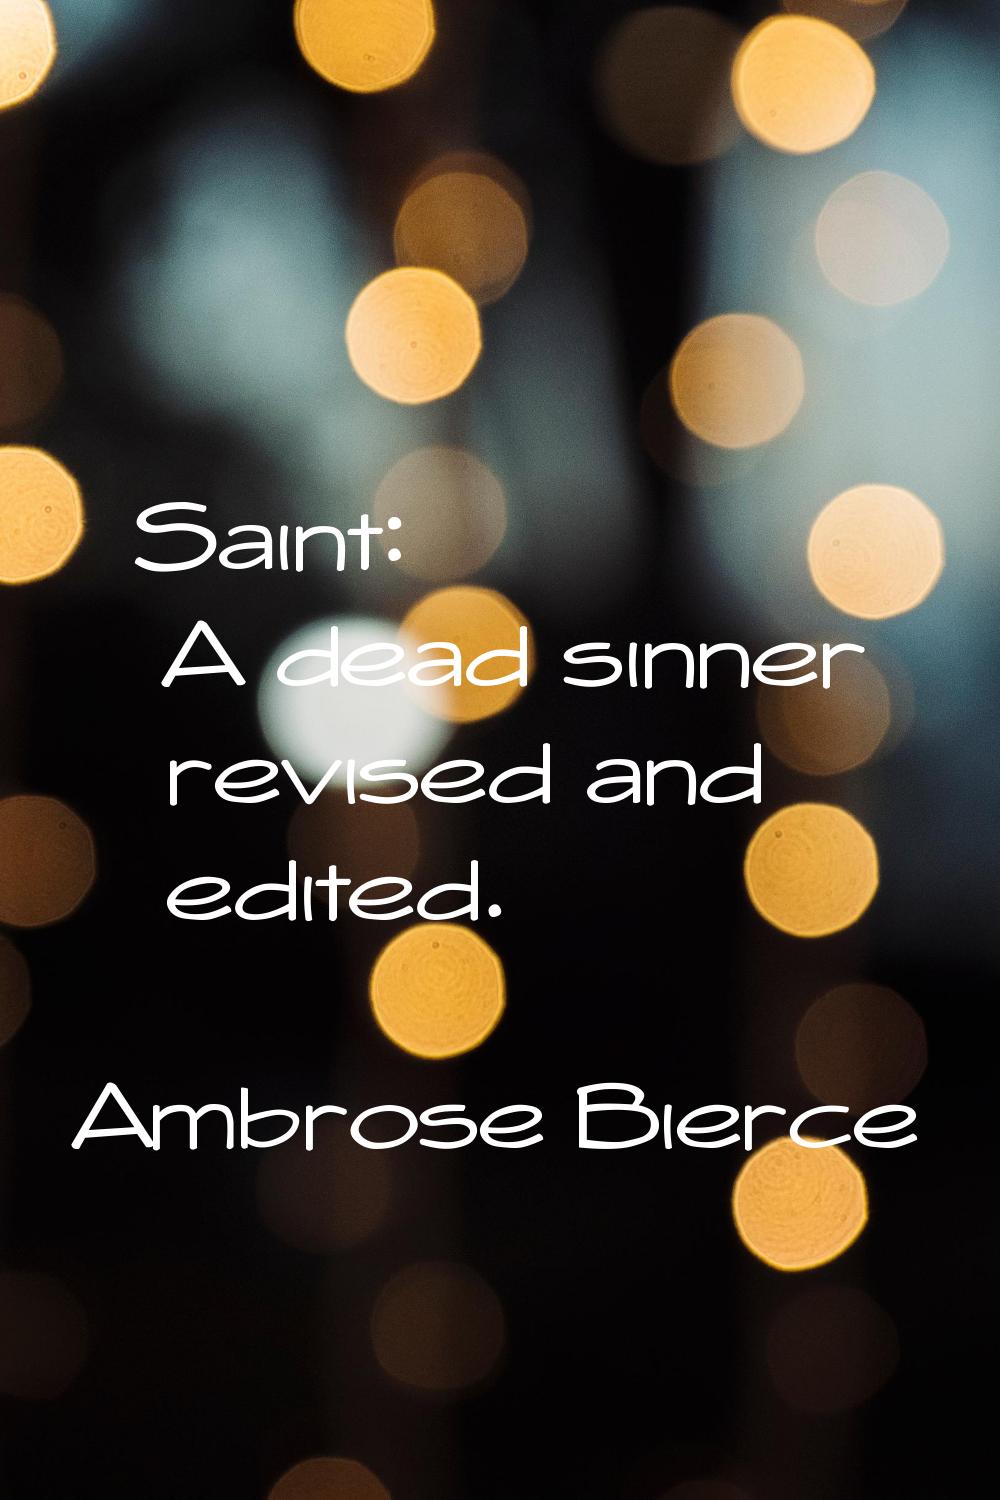 Saint: A dead sinner revised and edited.